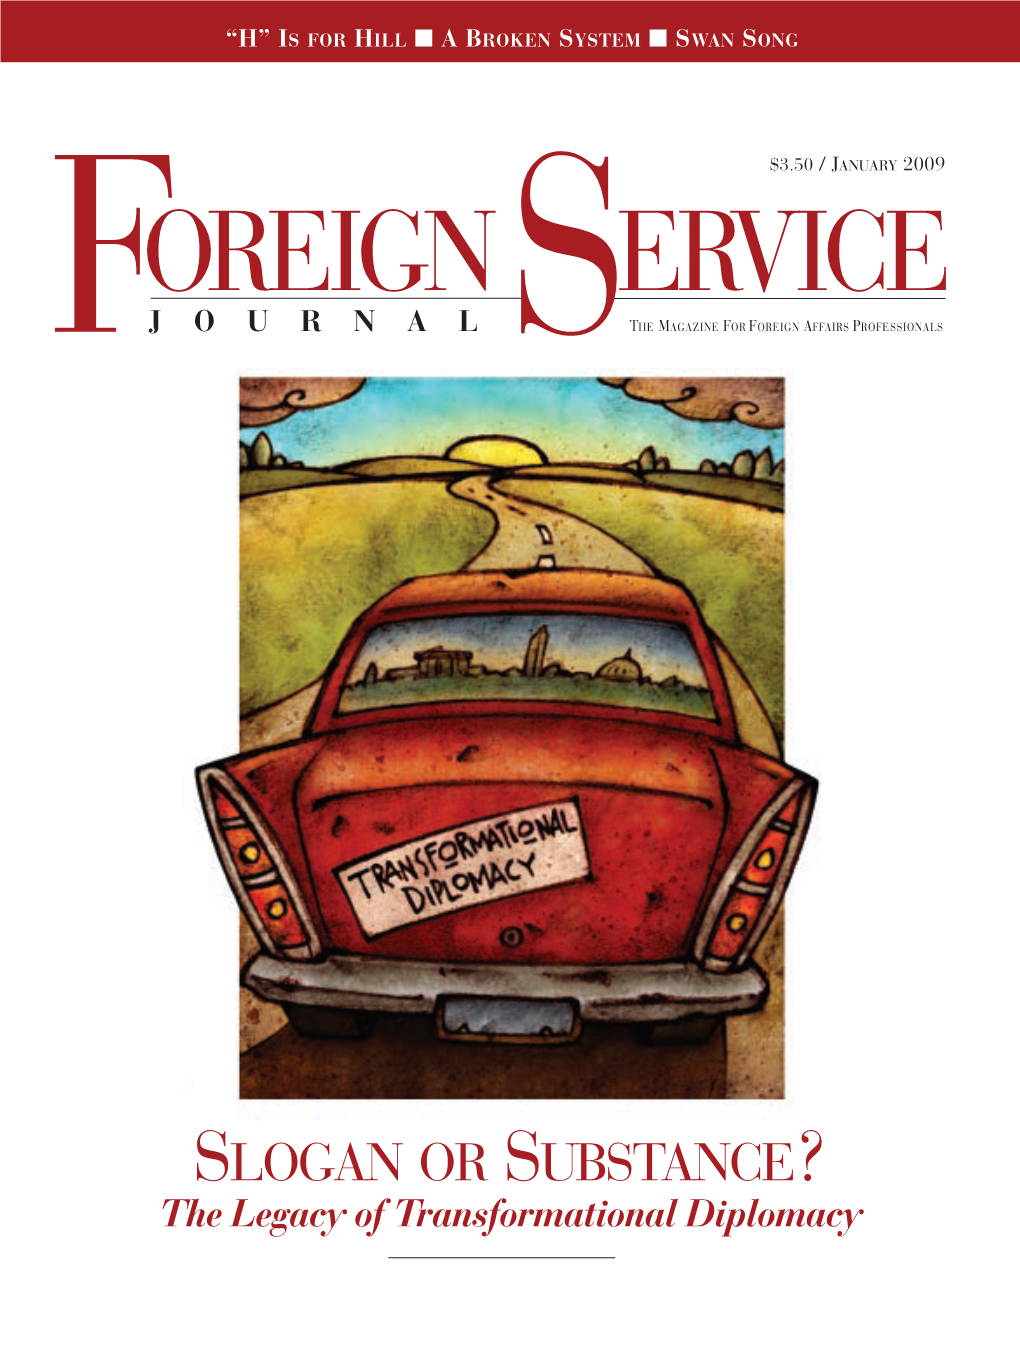 The Foreign Service Journal, January 2009